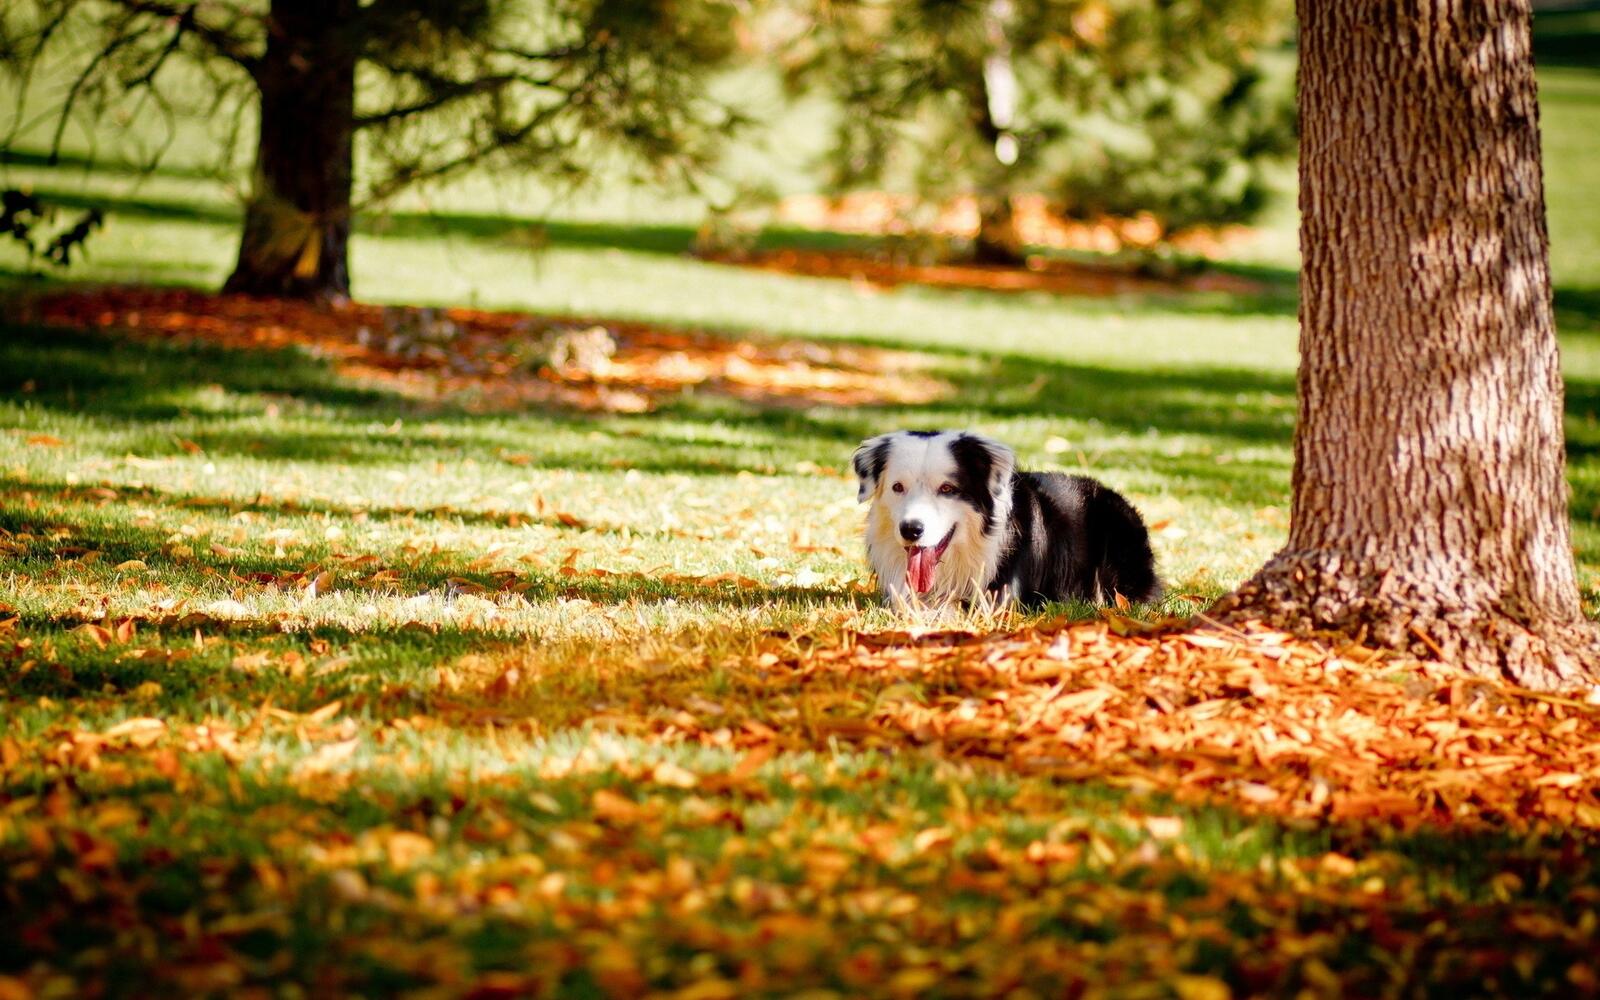 Free photo The dog is lying on the fallen leaves